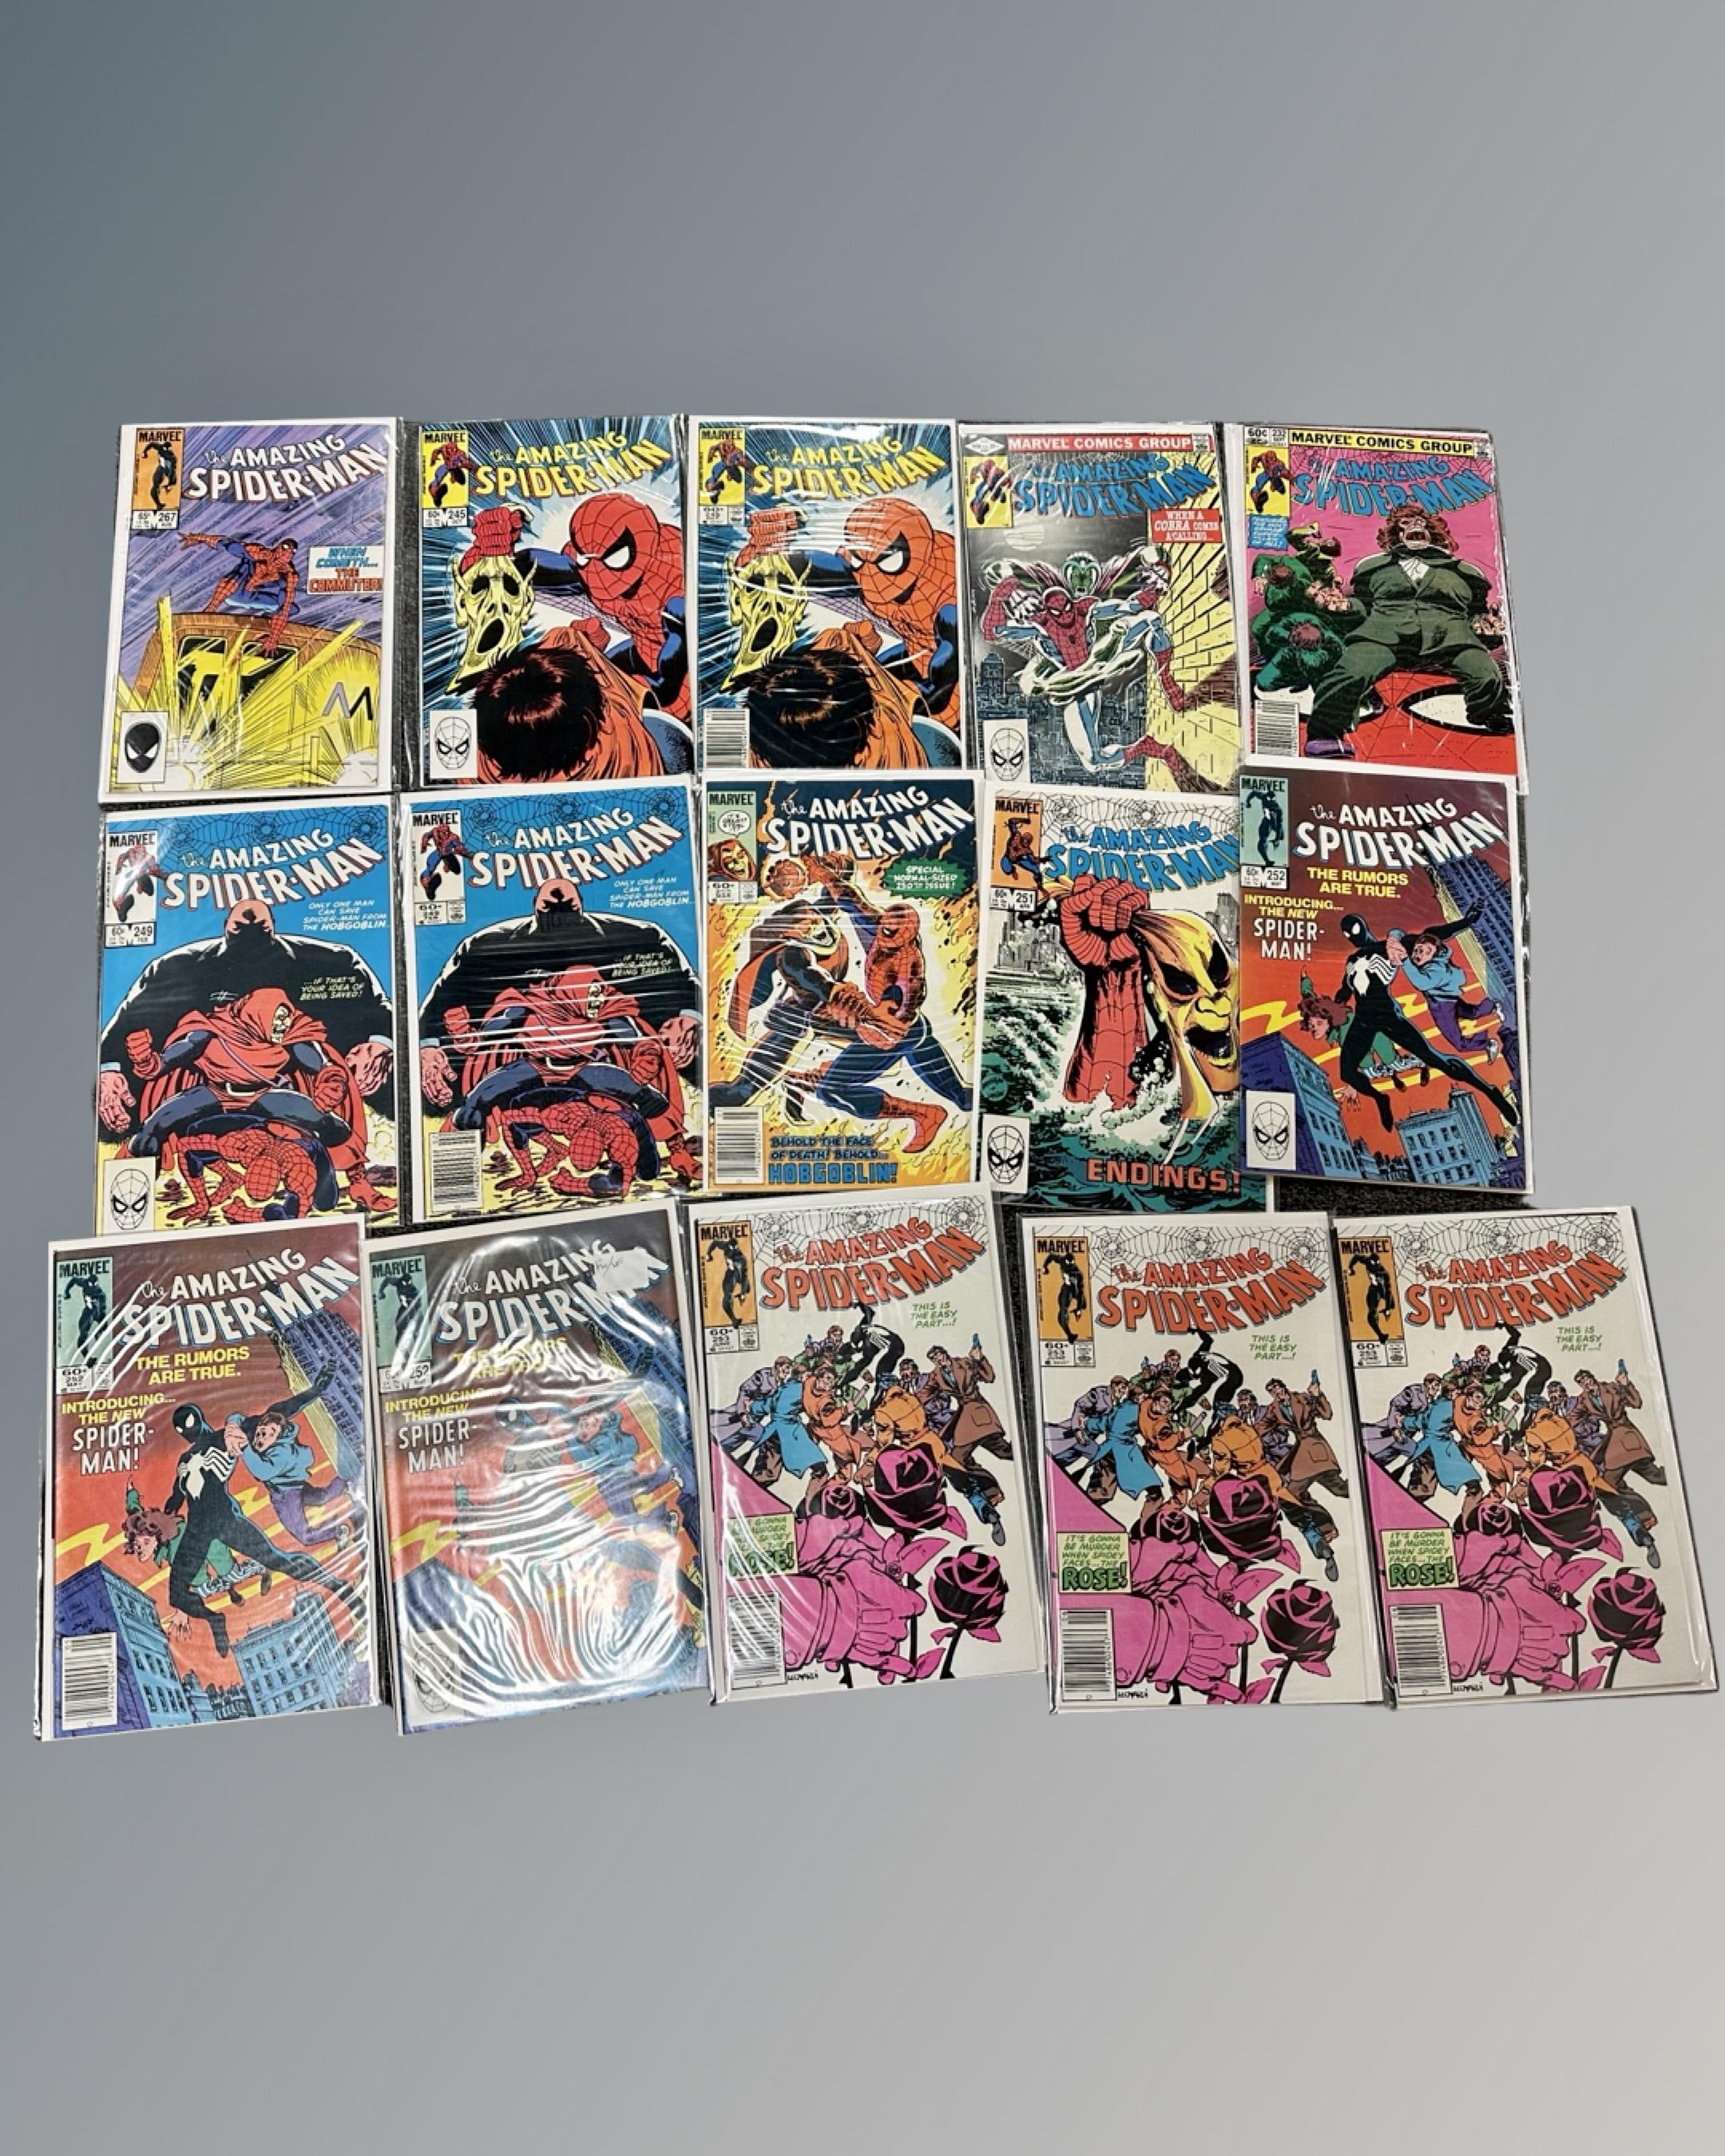 A box containing a large collection of Marvel's The Amazing Spider-Man comics. - Image 11 of 12